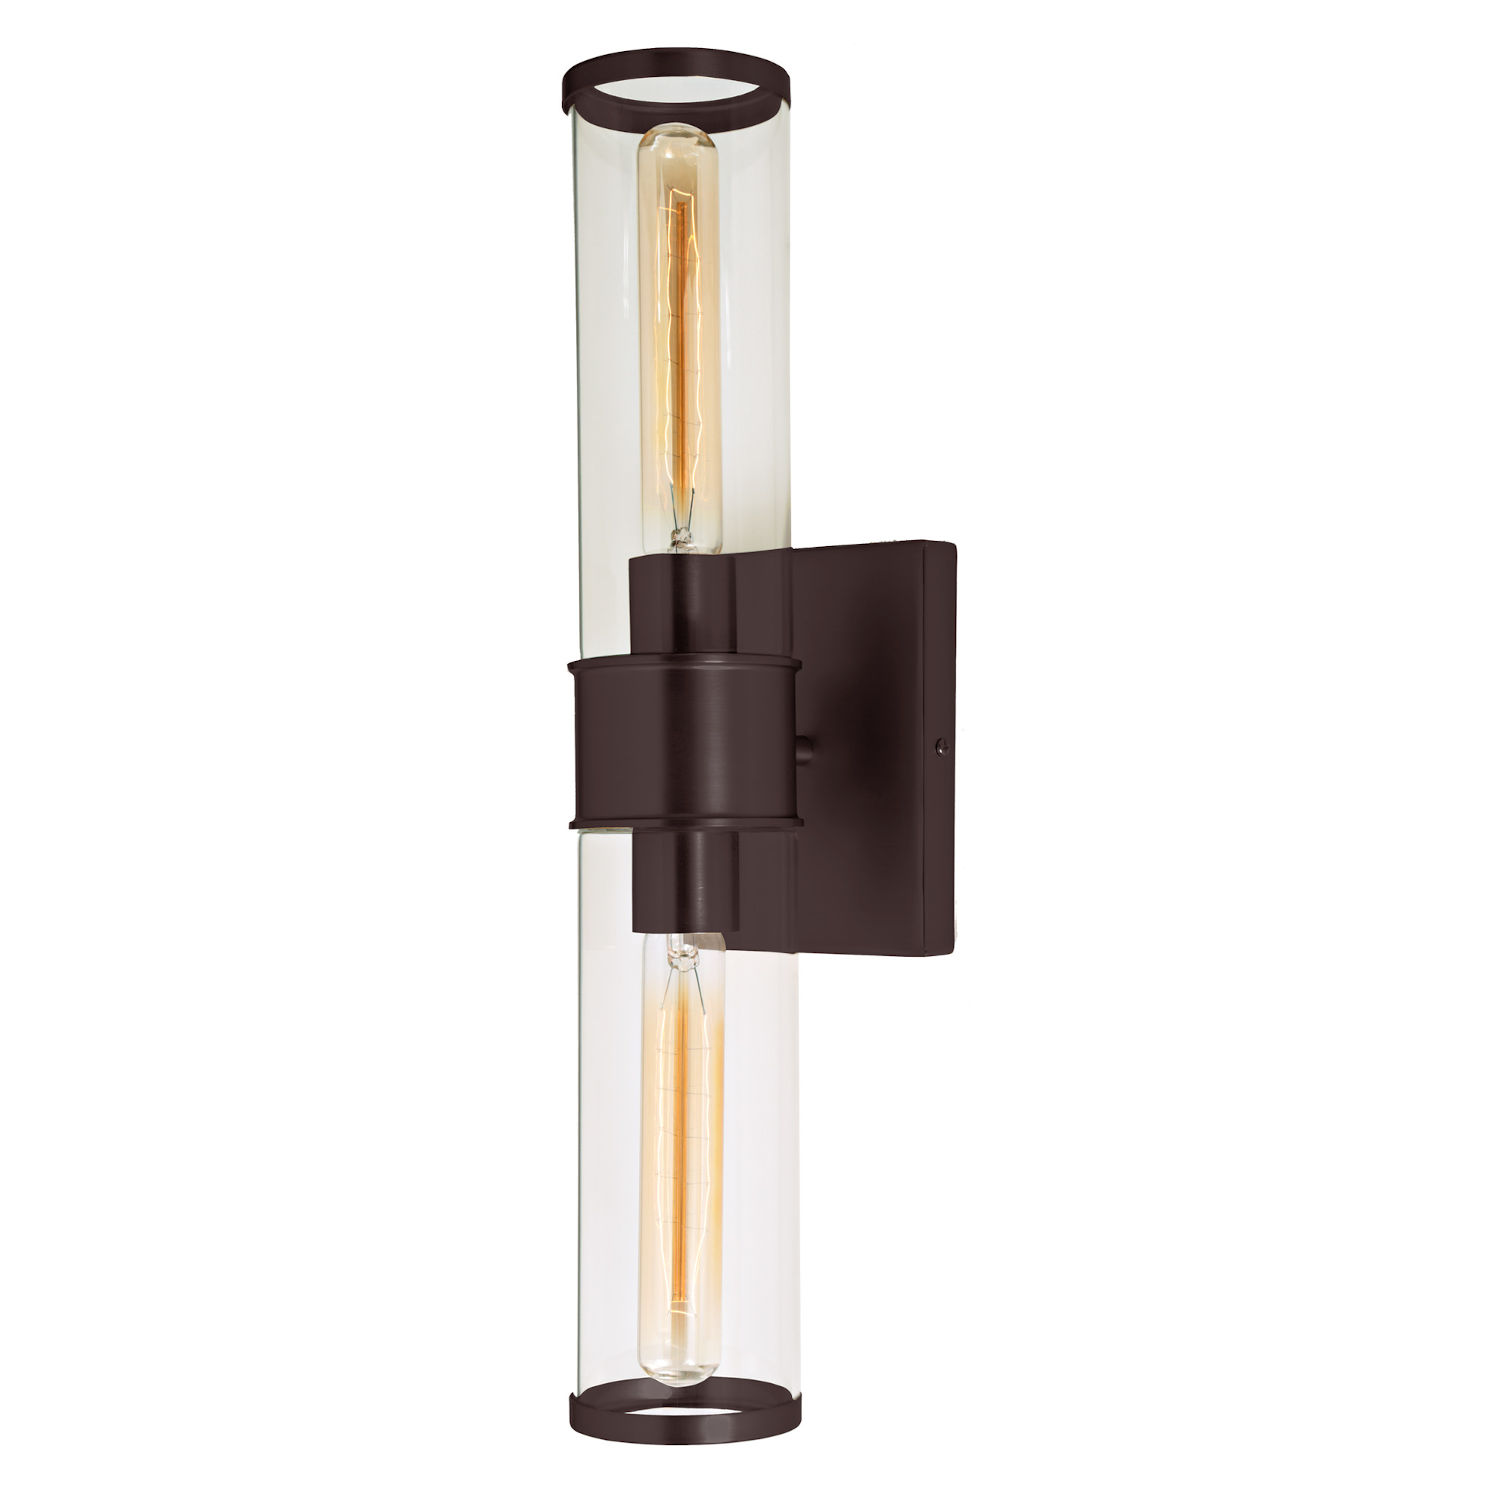 Gramercy Oil Rubbed Bronze Two-Light Wall Sconce